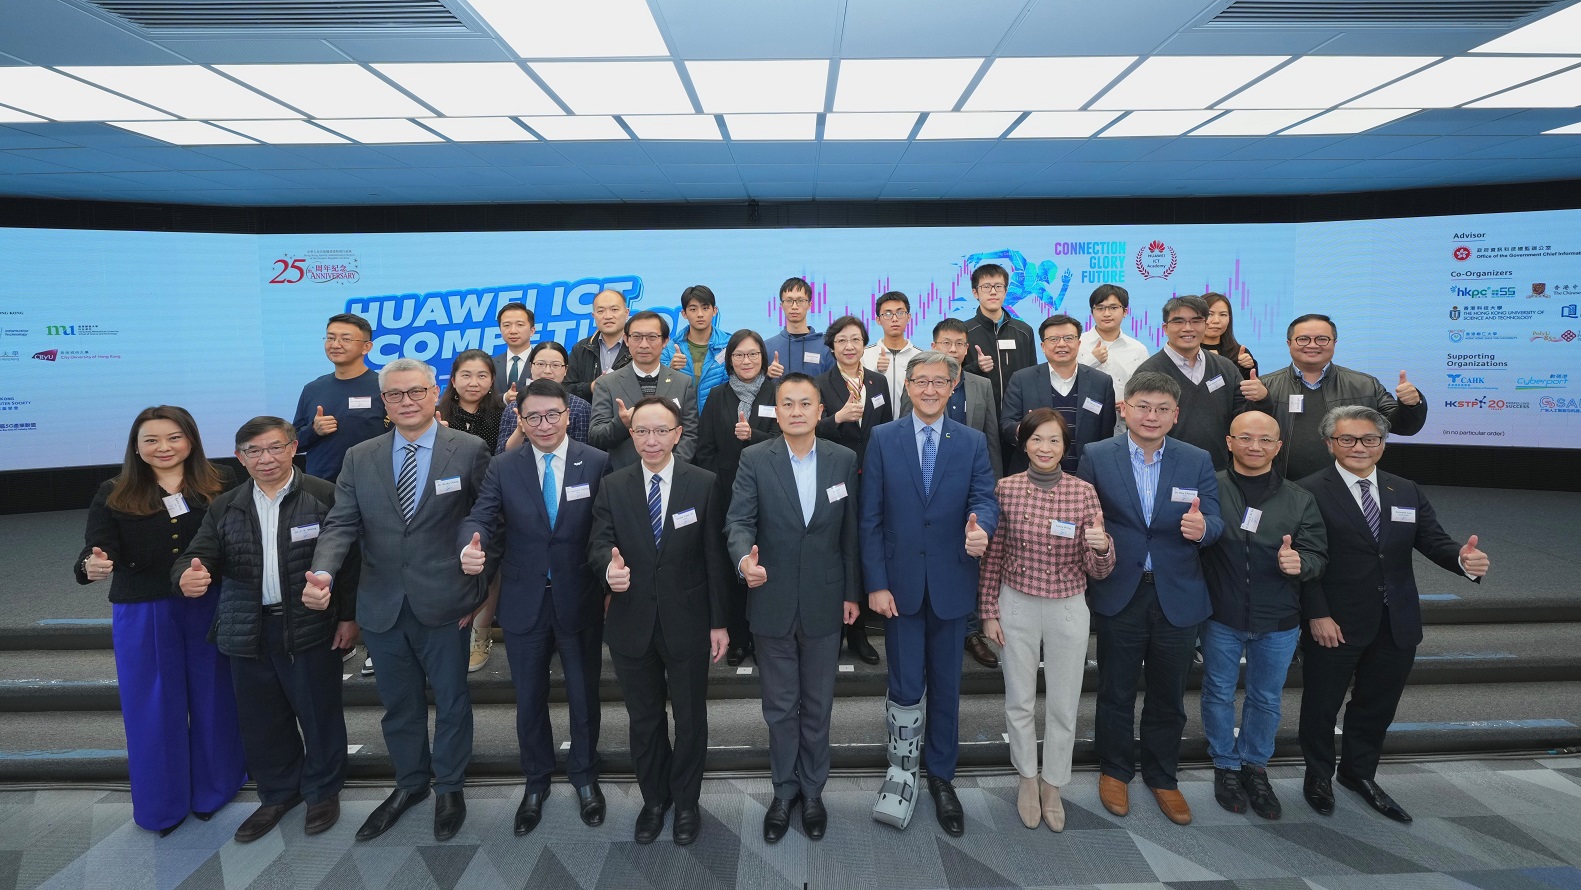 Mr Victor Lam, Government Chief Information Officer (5th left in first row), Mr Jerry Ji, Managing Director of Hong Kong Enterprise Business Group of Huawei (middle in first row), Mr Peter Yan, CEO of Cyberport (5th right in first row), Dr Lawrence Cheung, CIO of HKPC (4th left in first row), Ms Fanny Wong, Head of Talent & Human Resources of HKSTP (4th right in first row), Dr Rocky Cheng, President of HKCS (3rd left in first row), Dr Ray Cheung, Chairman of Standing Committee of Hong Kong STEM Education Alliance (3rd right in first row), Dr C. K. WONG, MH, Chairman and Co-founder of iASPEC Technologies (Holdings) Limited (2nd left in first row), Dr Donny Siu, Acting Director, cum Head (Entrepreneurship Programs) of  HHKUST Entrepreneurship Center (2nd right in first row), Ms Karen Fung, General Manager of InnoPreneur and FutureSkills Division of HKPC (1st left in first row) and Mr Kenneth Lau, Chairman of Communications Association of Hong Kong (1st right in first row), in group photo with other guests.